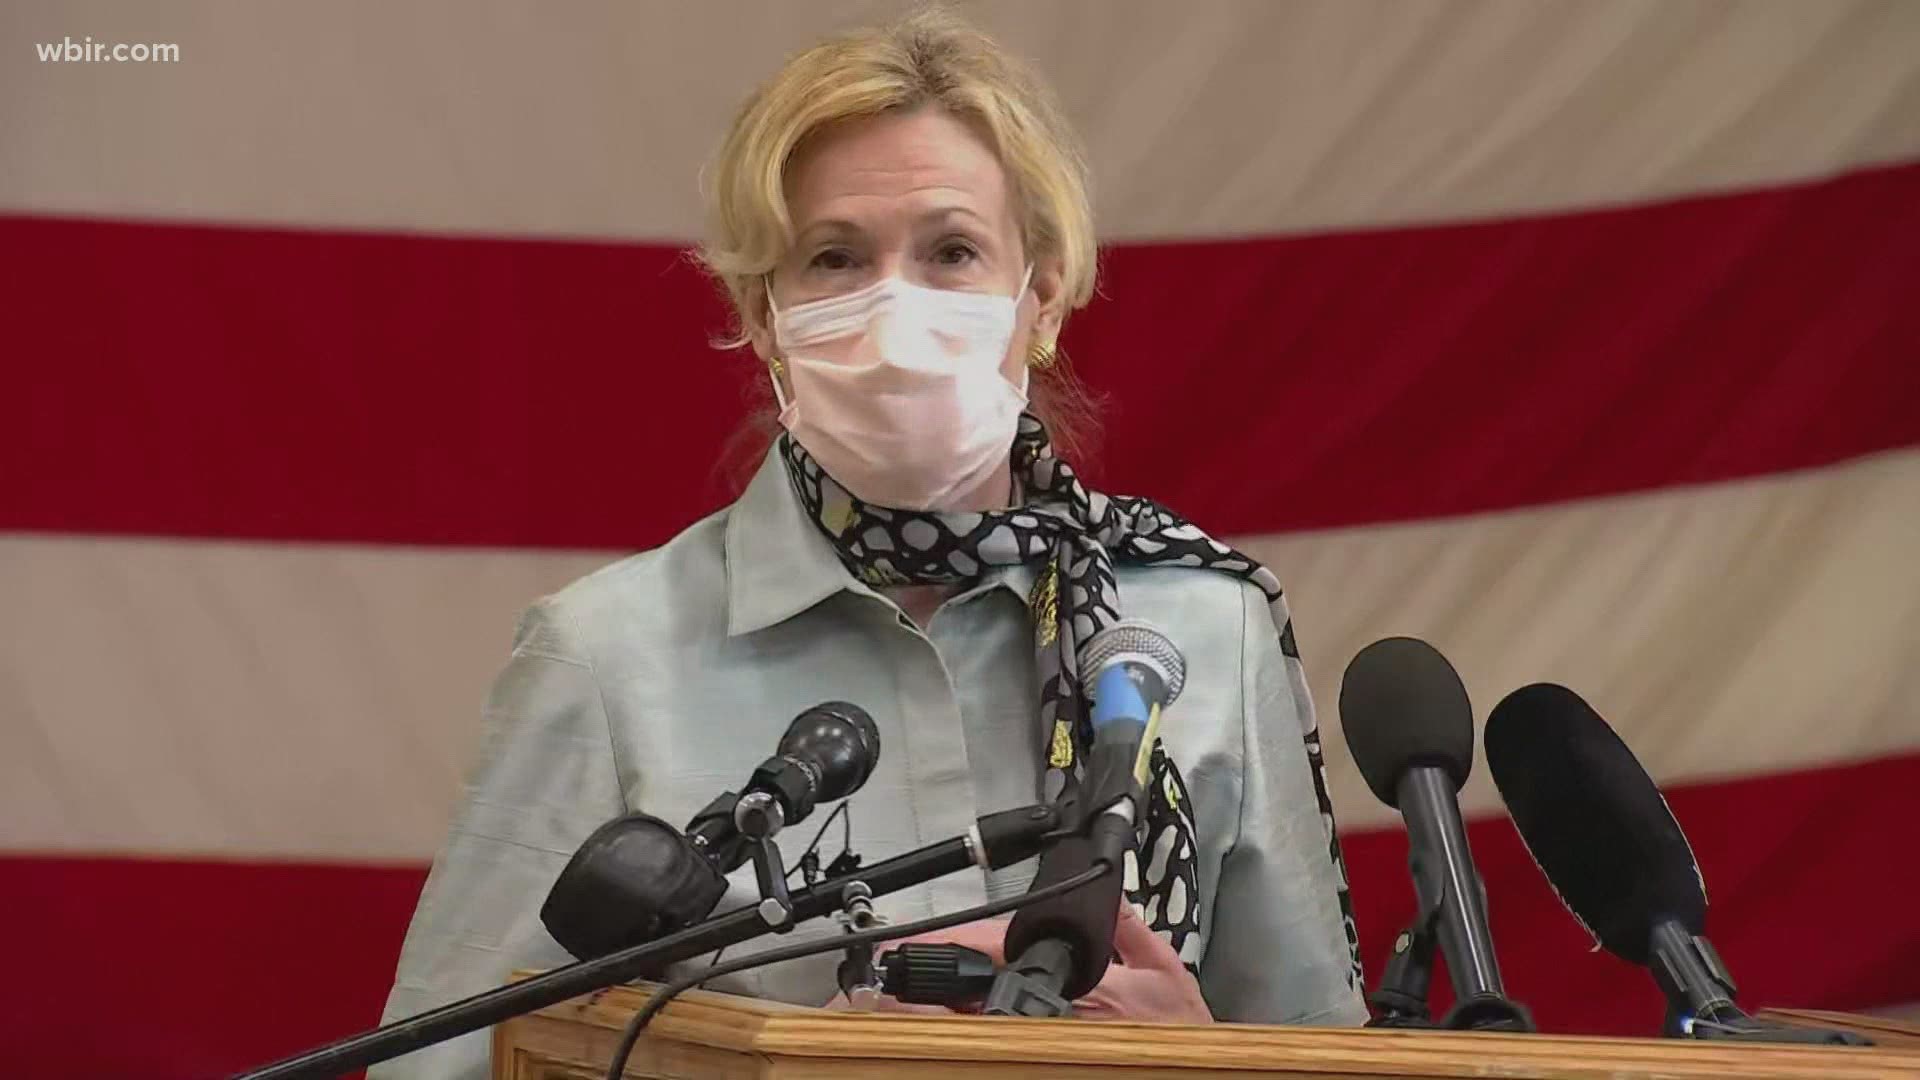 Dr. Deborah Birx, a member of the White House virus task force, called on all Tennesseans to put on a mask to combat spread of the virus.